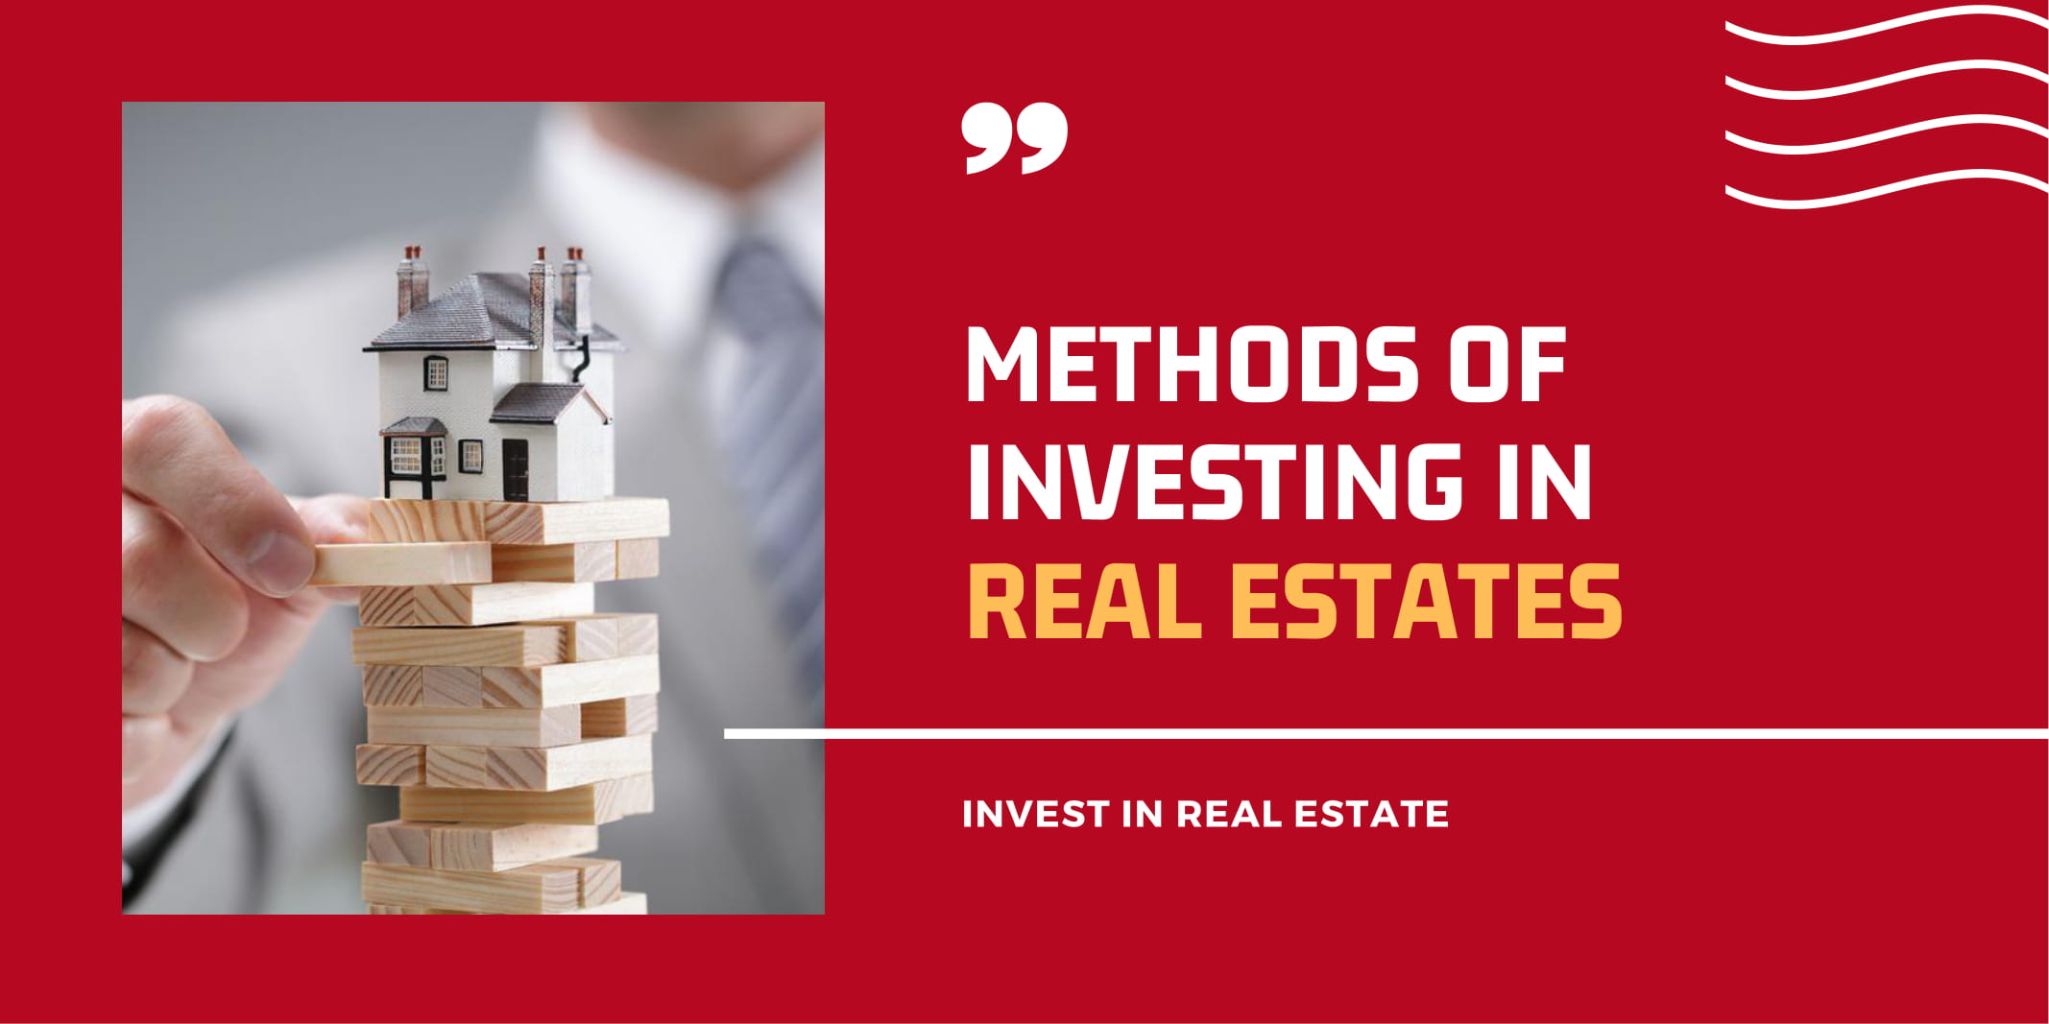 Real Estate Investing Basics: 2 Ways of Real Estate Investment